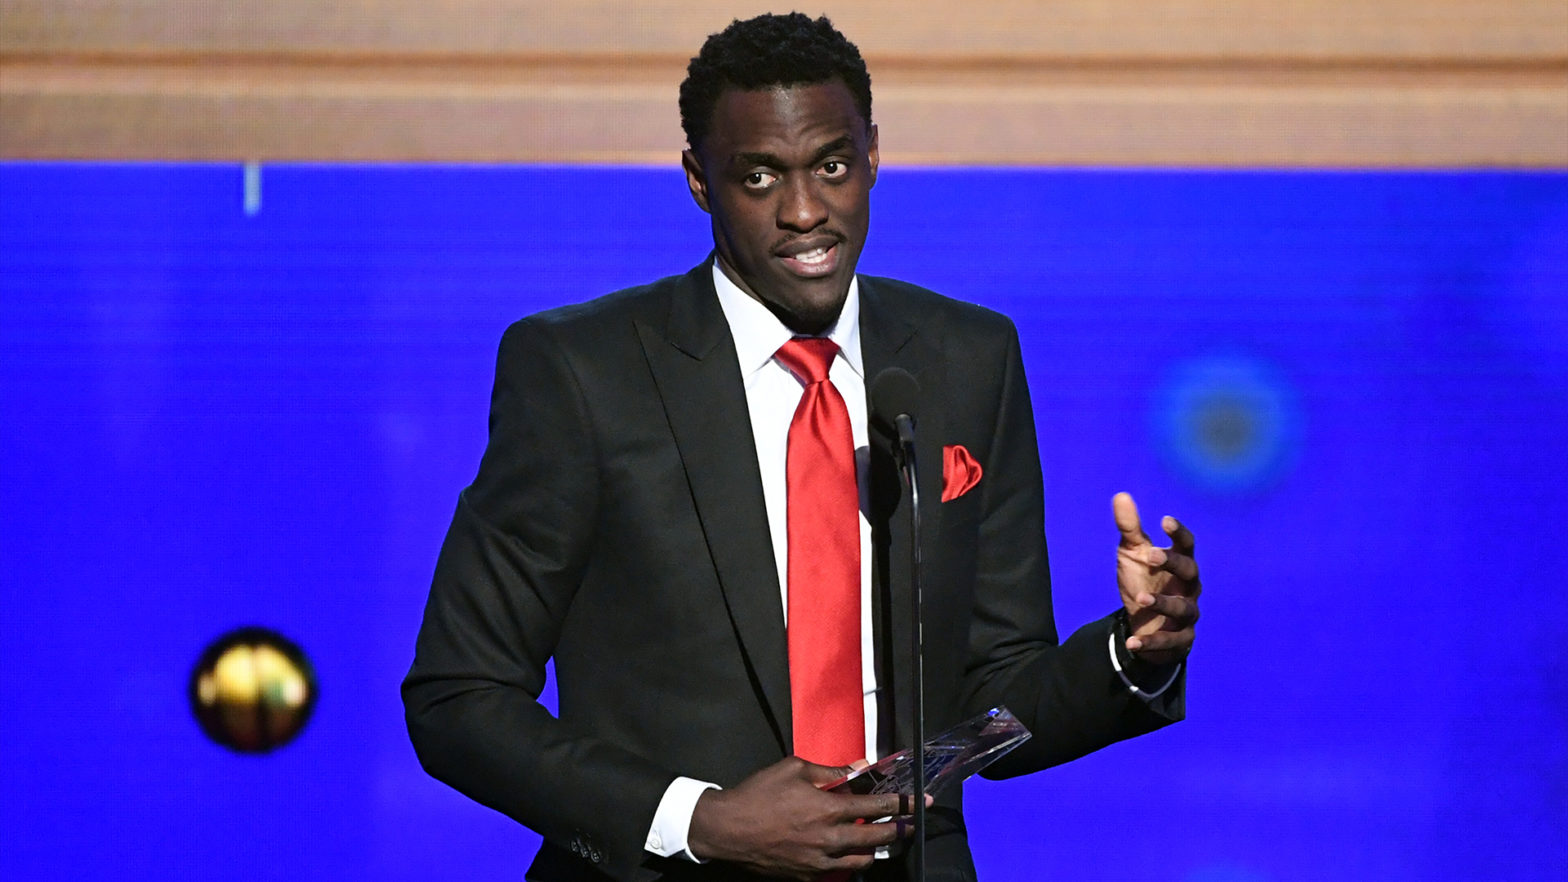 Raptors' Pascal Siakam Gives Free Laptops To Young Girls In Toronto With A Goal Of Lessening The Gender Gap In Tech